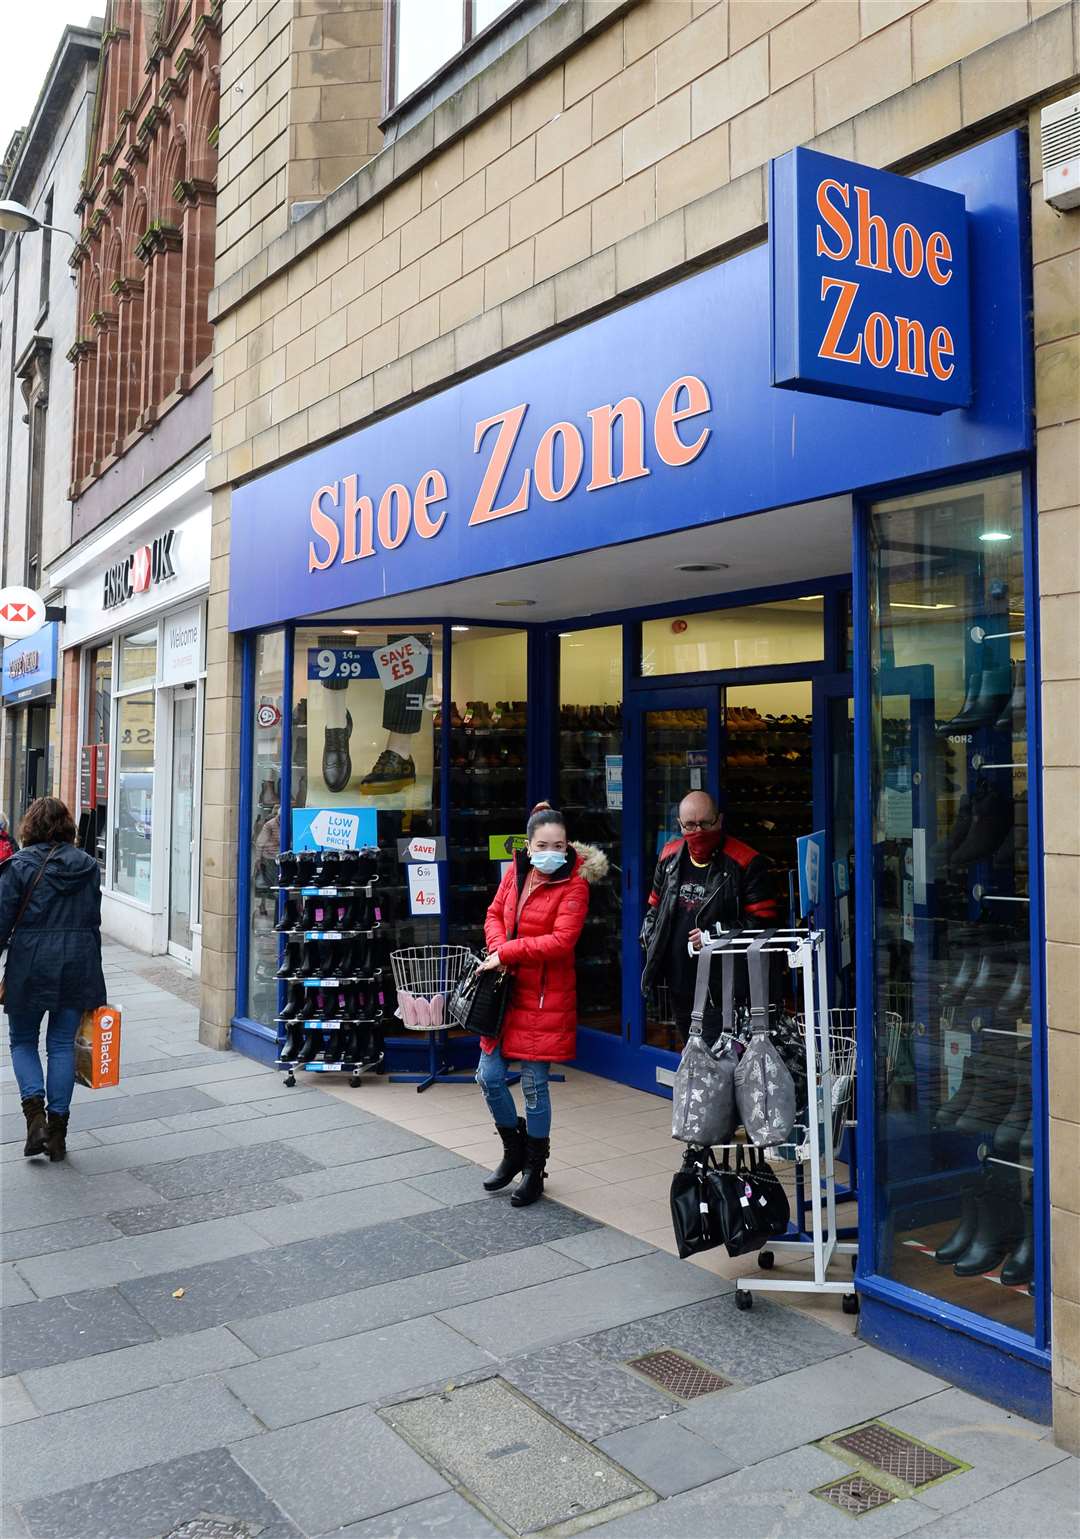 Shoe Zone's High Street Inverness branch.